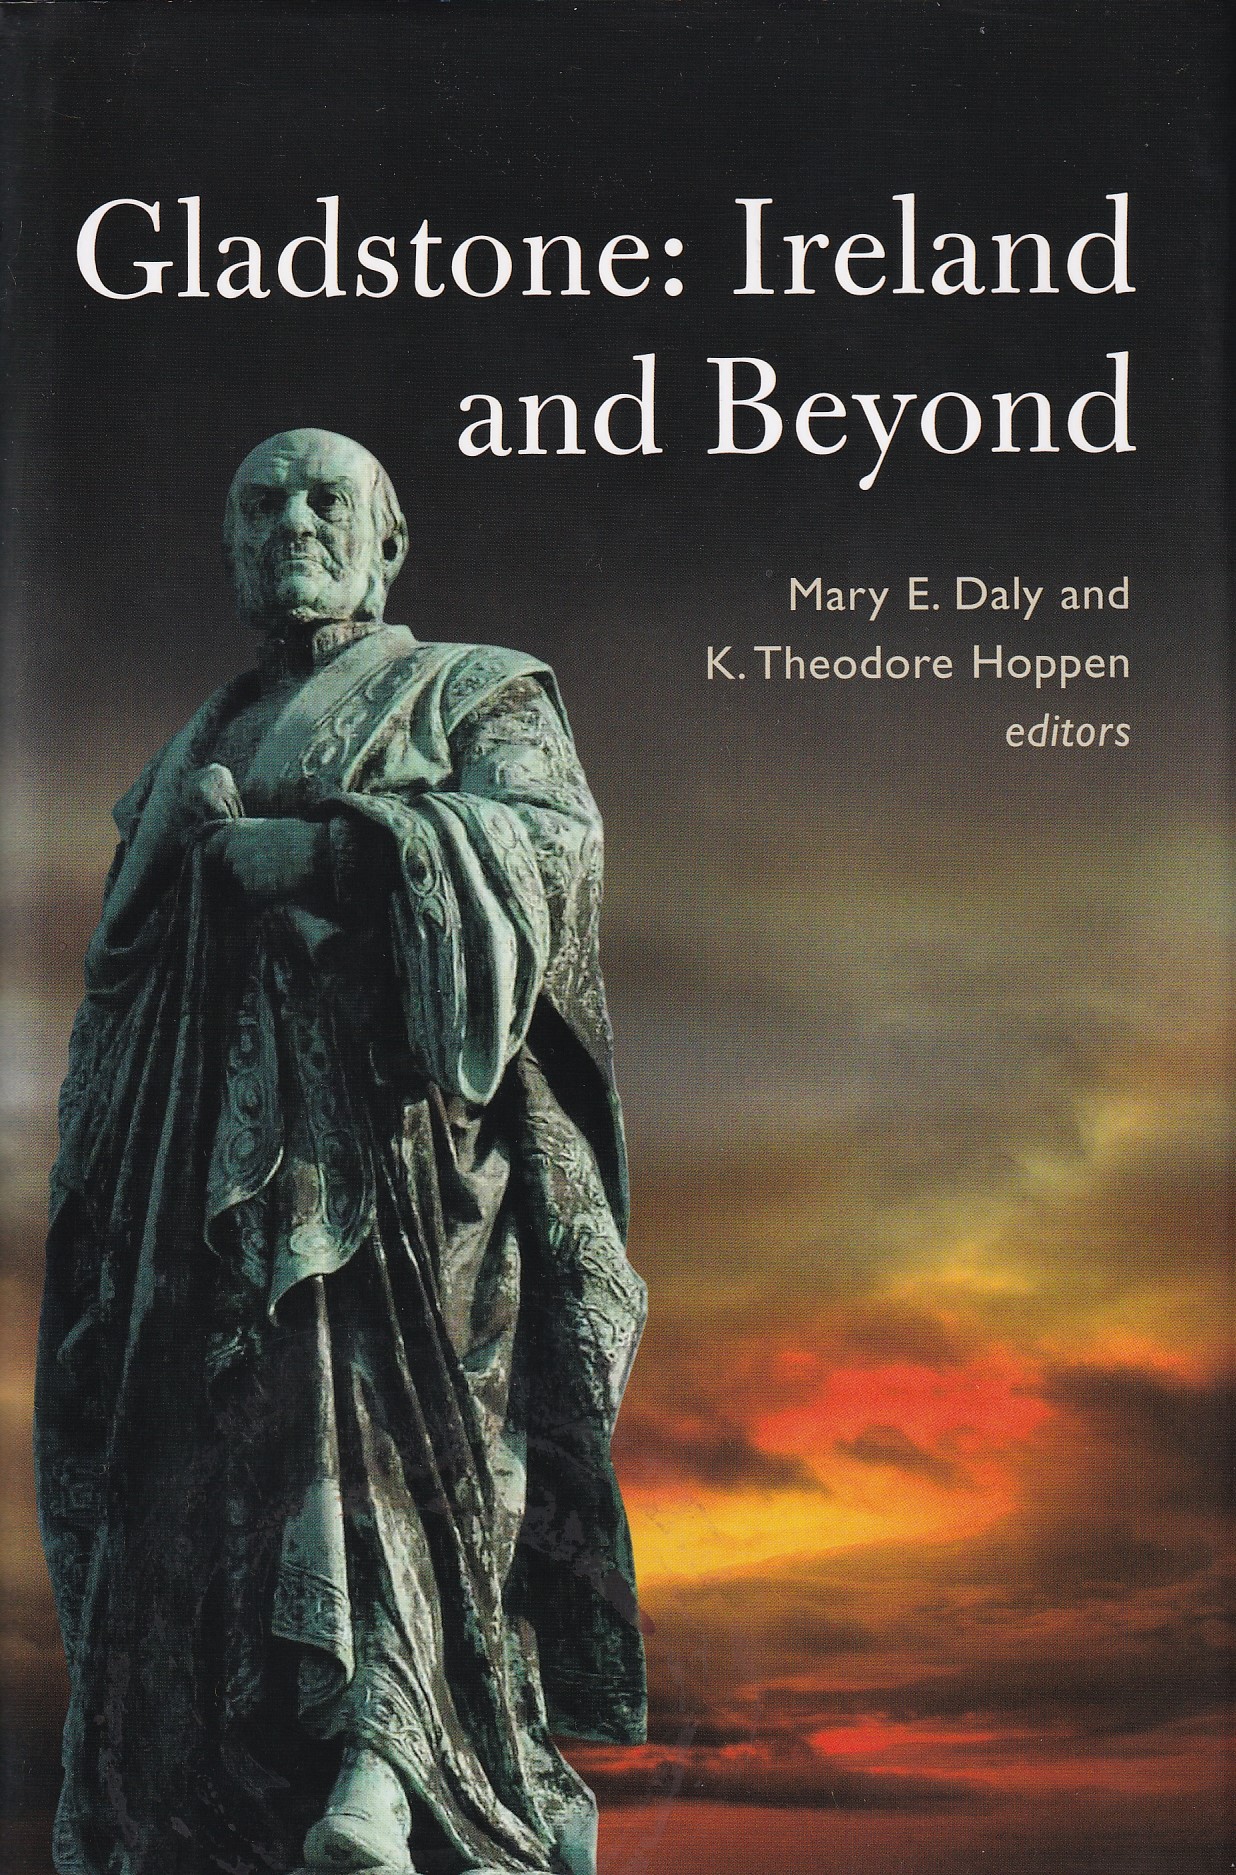 Gladstone: Ireland and Beyond | Mary E. Daly & K. Theodore Hoppen (eds.) | Charlie Byrne's